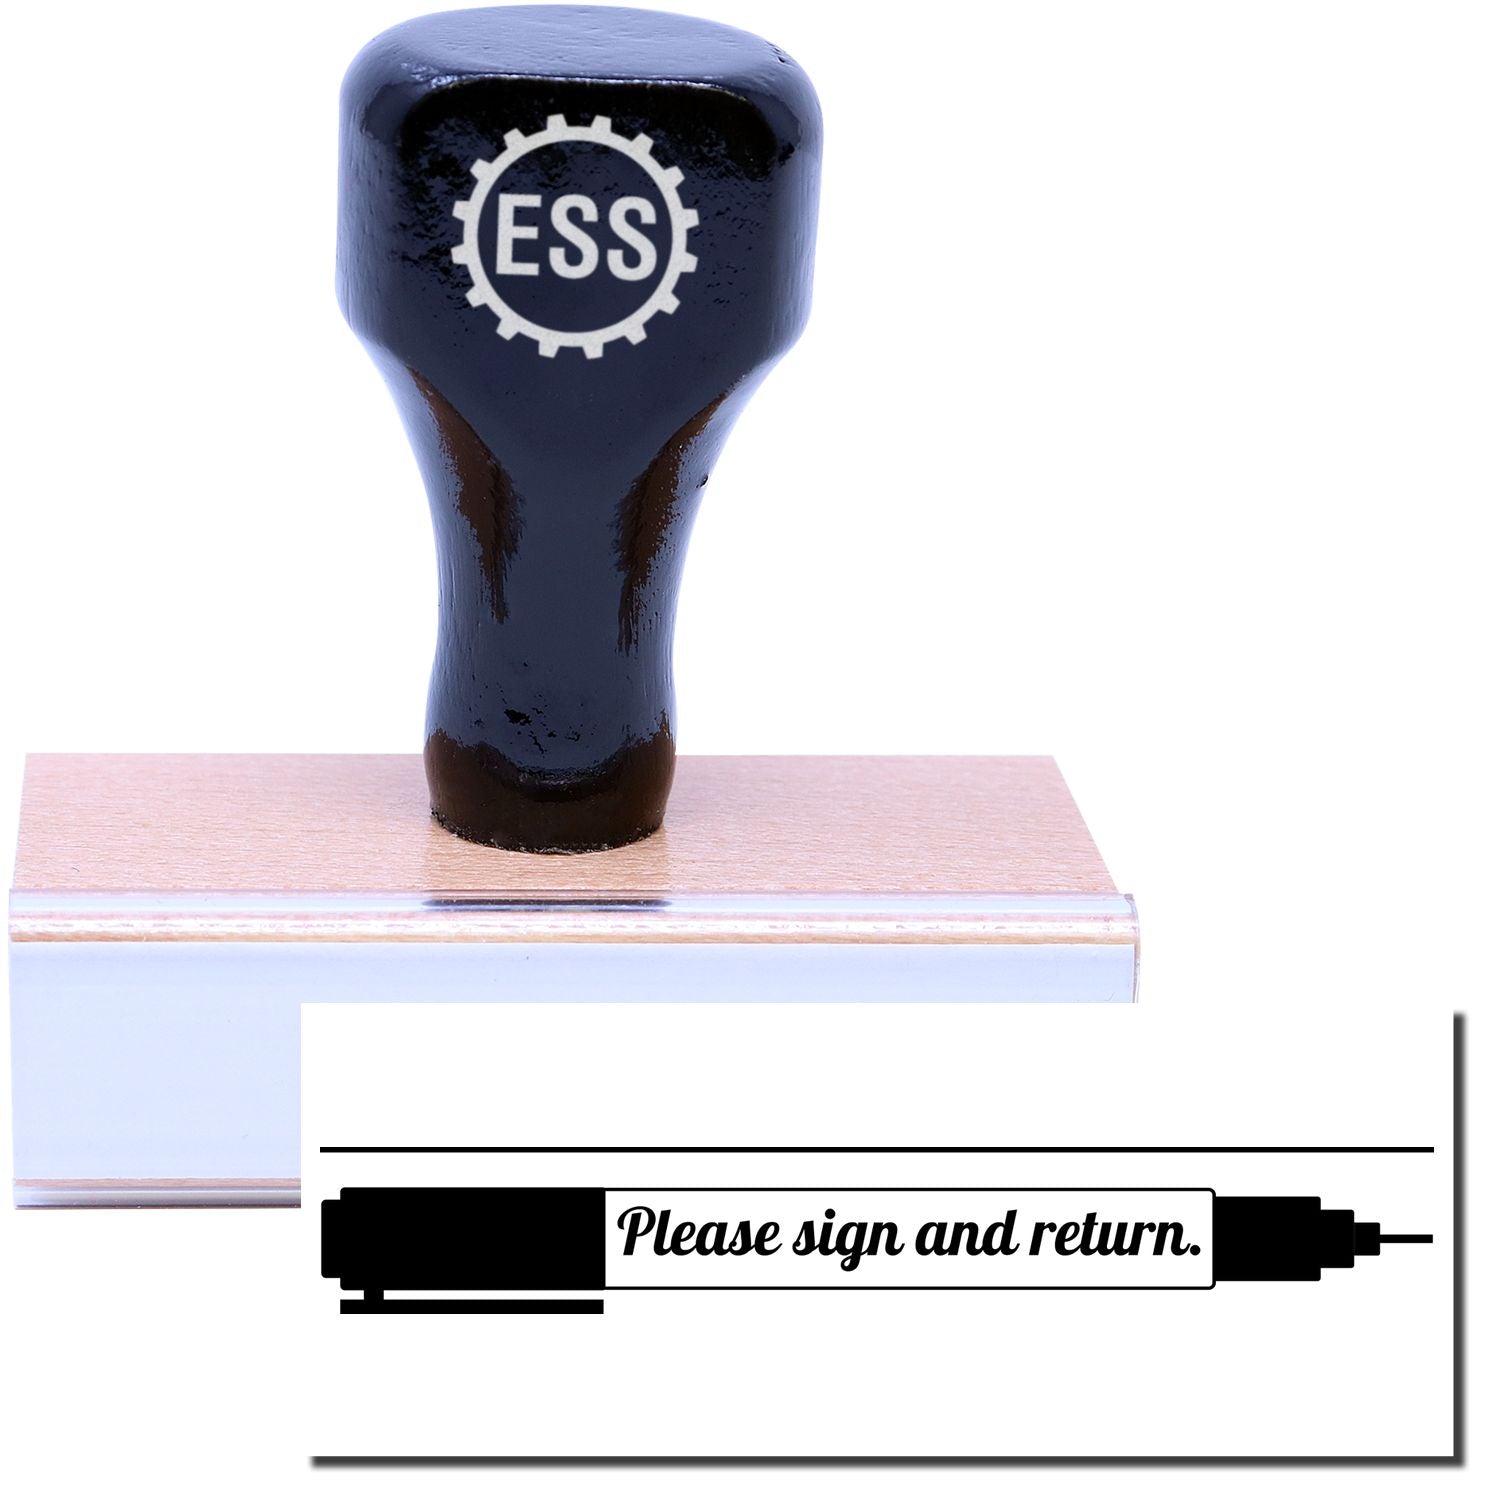 A stock office rubber stamp with a stamped image showing how the text "Please sign and return." in a large cursive font with an image of a pen is displayed after stamping.